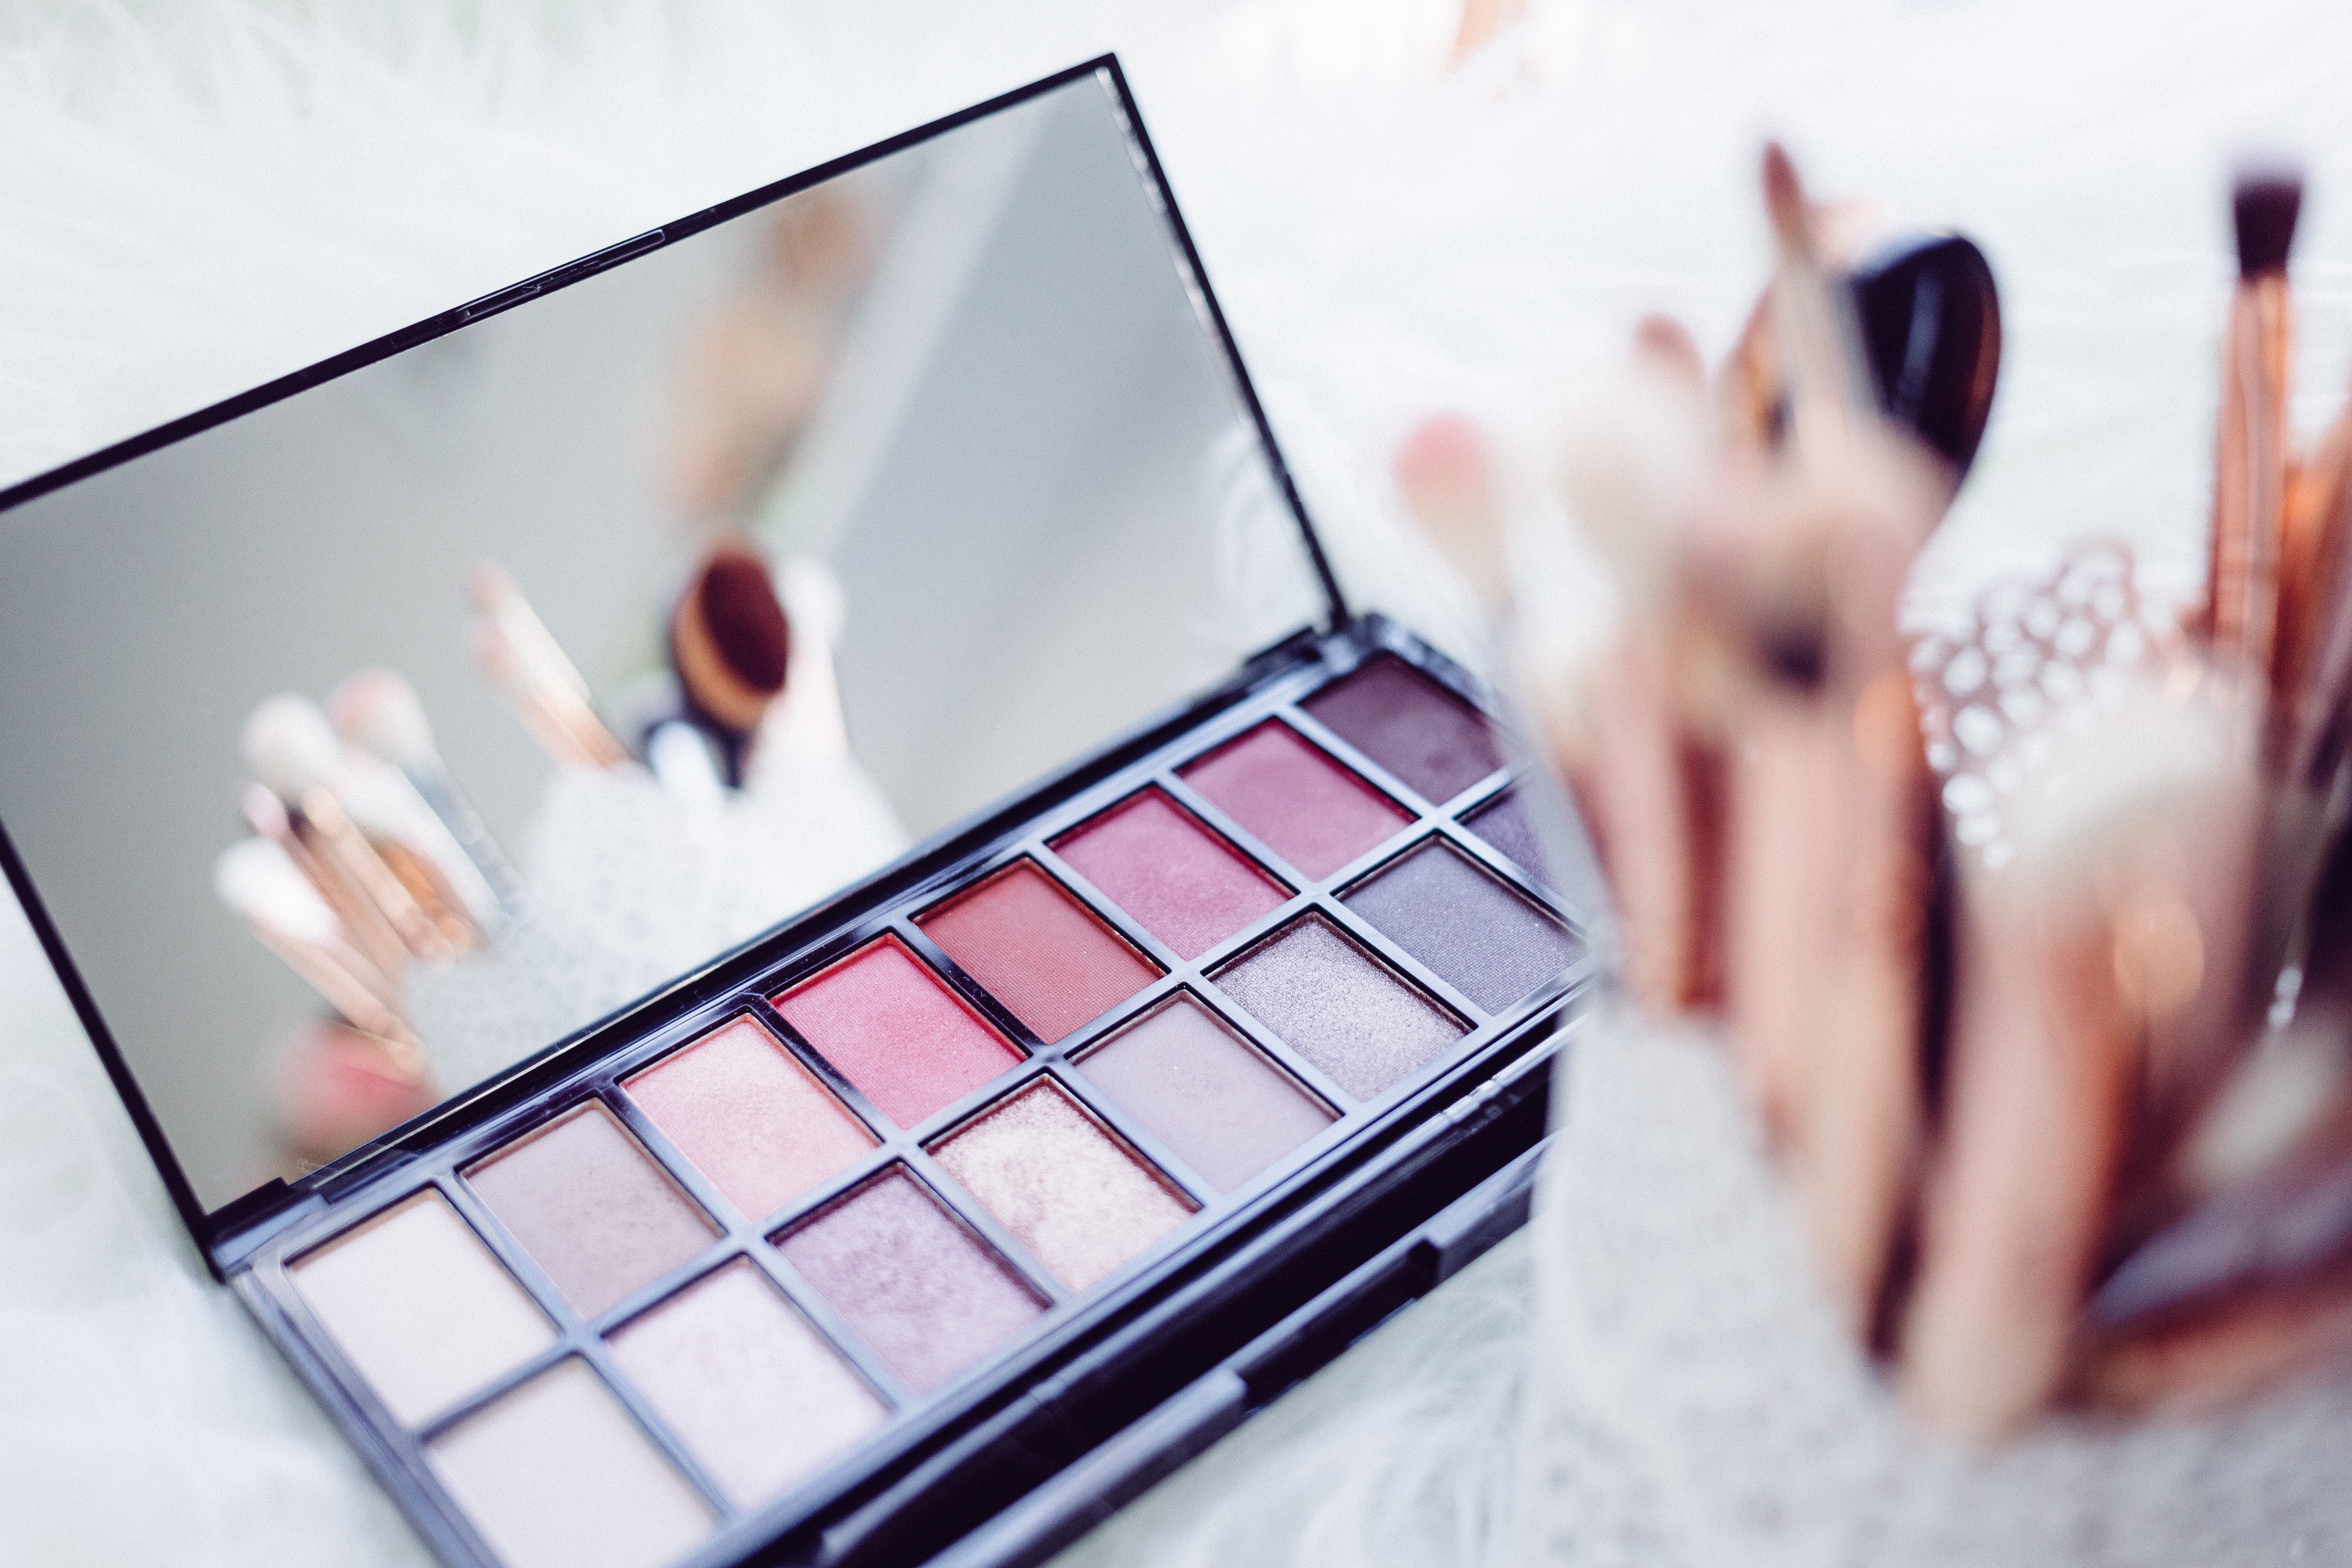 Find Hair And Makeup Artists in   Craigieburn Get the best prices from 2,000+ of the most reviewed Hair And Makeup Artists  near Craigieburn. Pick from mobile stylists or salons.